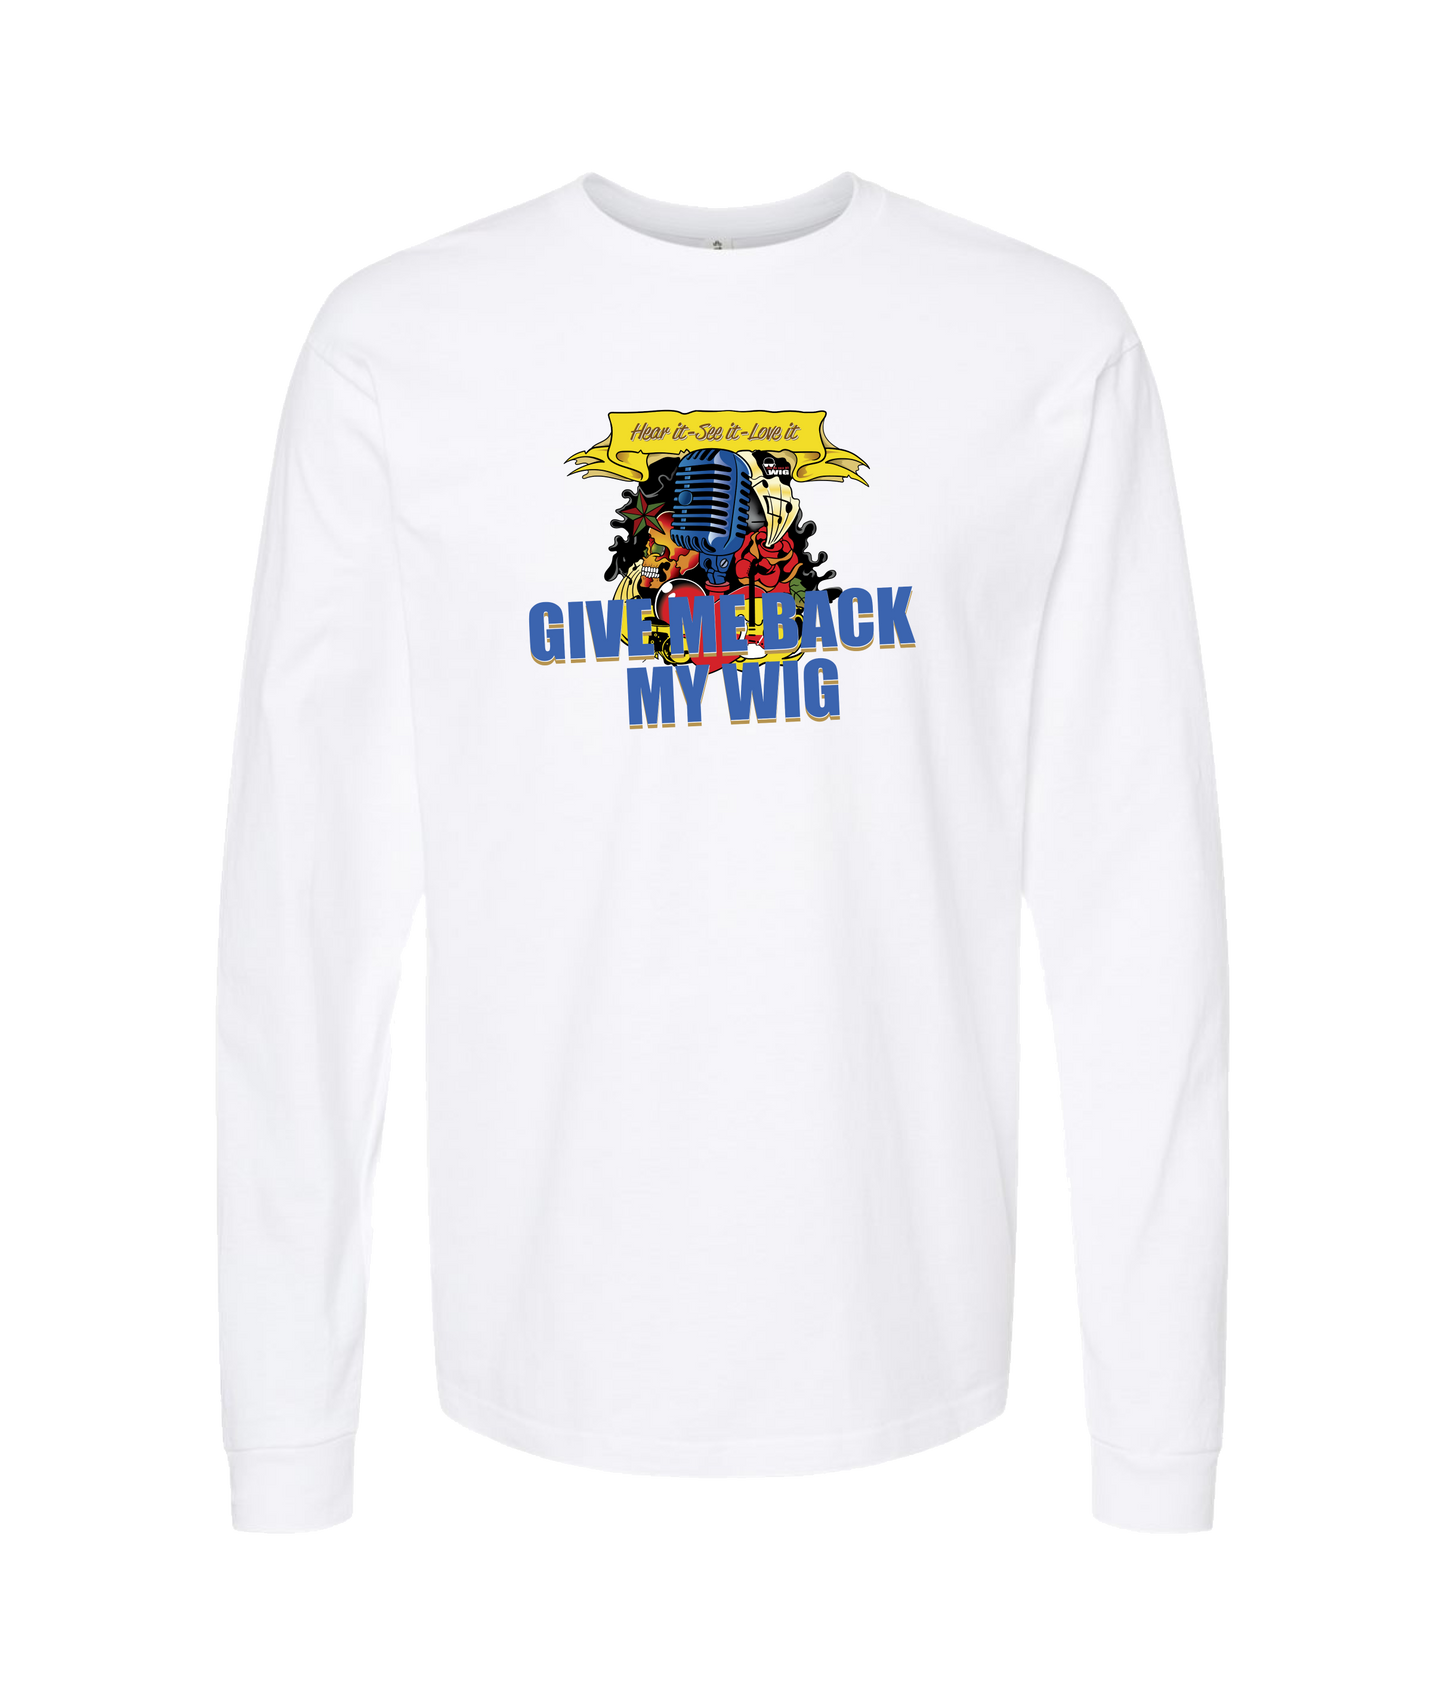 Give Me Back My Wig - Hear it - See it - Love it - White Long Sleeve T